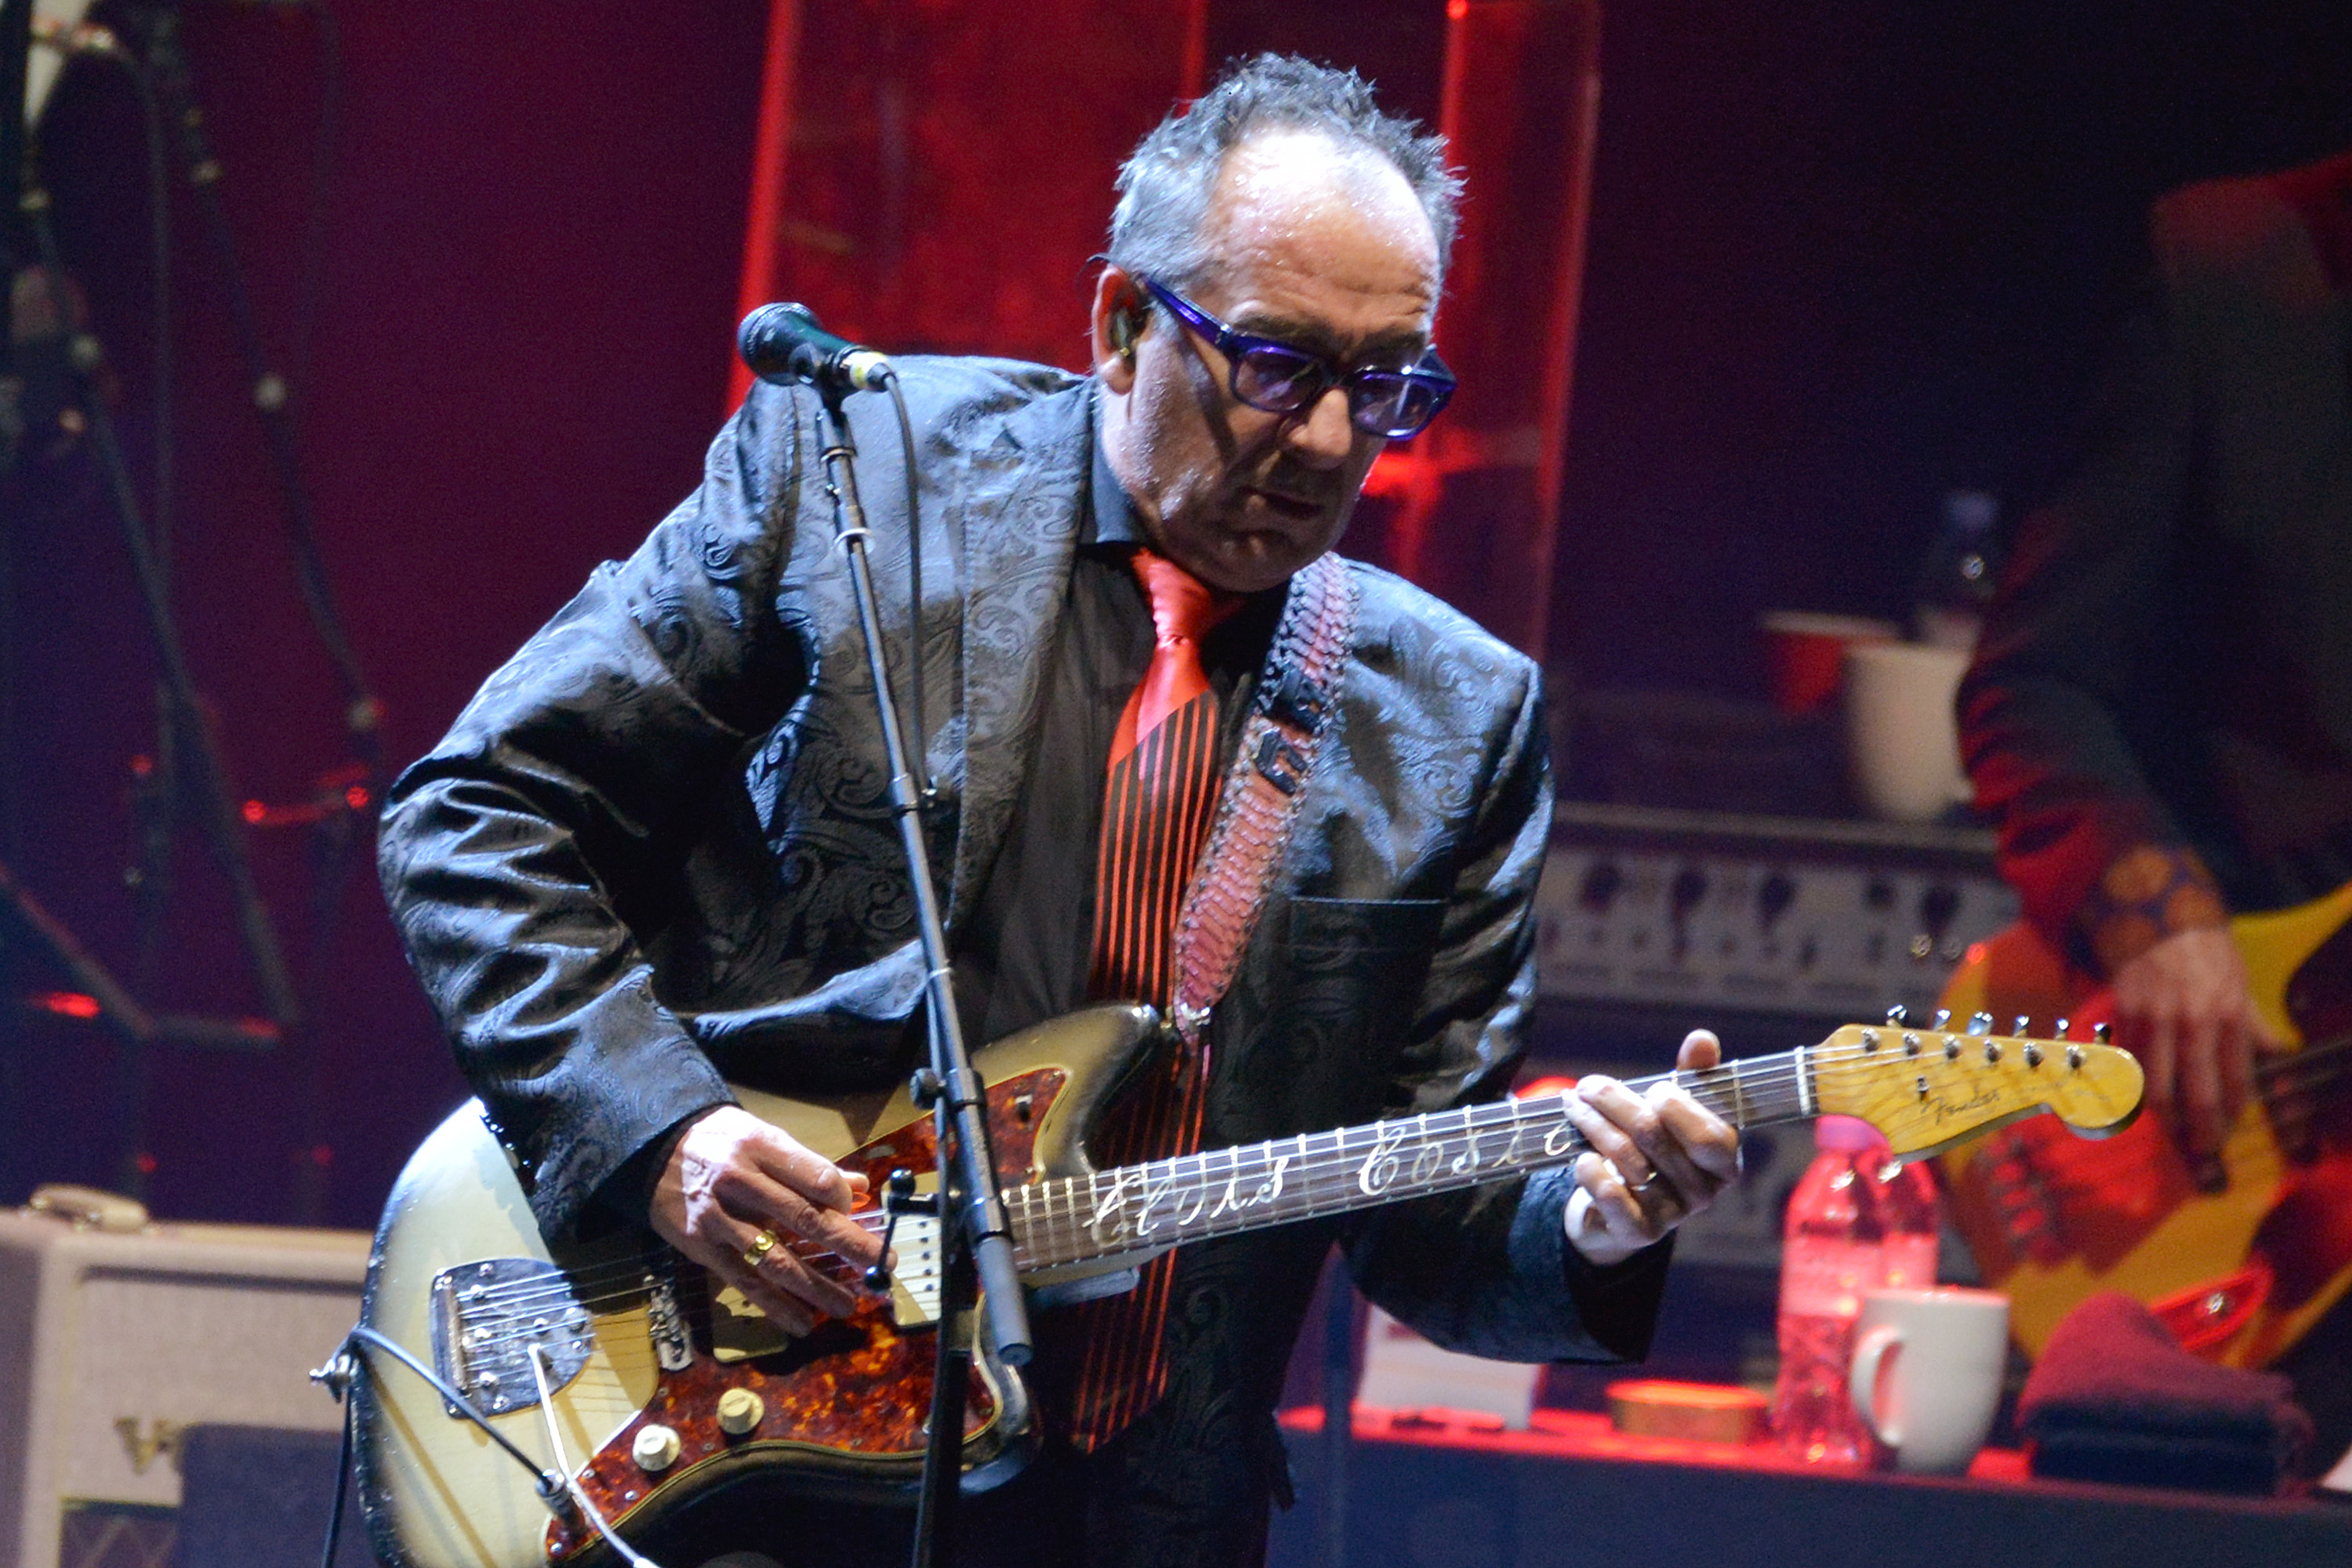 Elvis Costello performs live on stage with The Imposters at Hammersmith Apollo on March 13, 2020 in London, England. The musician no longer wants radio stations to play his track "Oliver's Army."